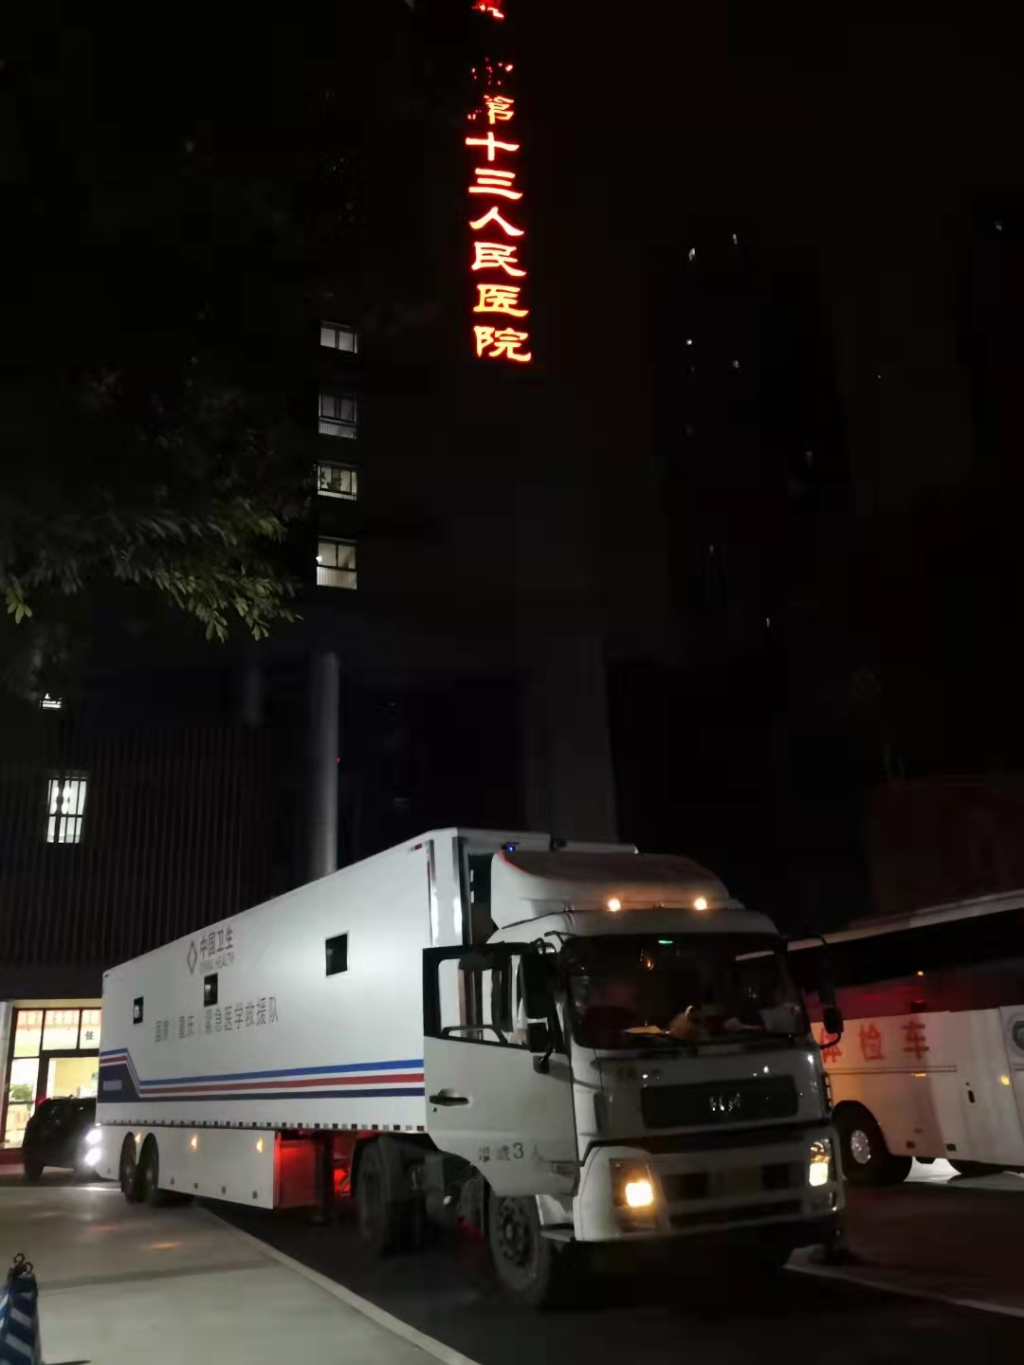 After the outbreak of the epidemic, a novel coronavirus disease (COVID-19) test vehicle of the 13th People's Hospital of Chongqing was ready and set out overnight. (Photo provided by Chongqing Municipal Health Commission)